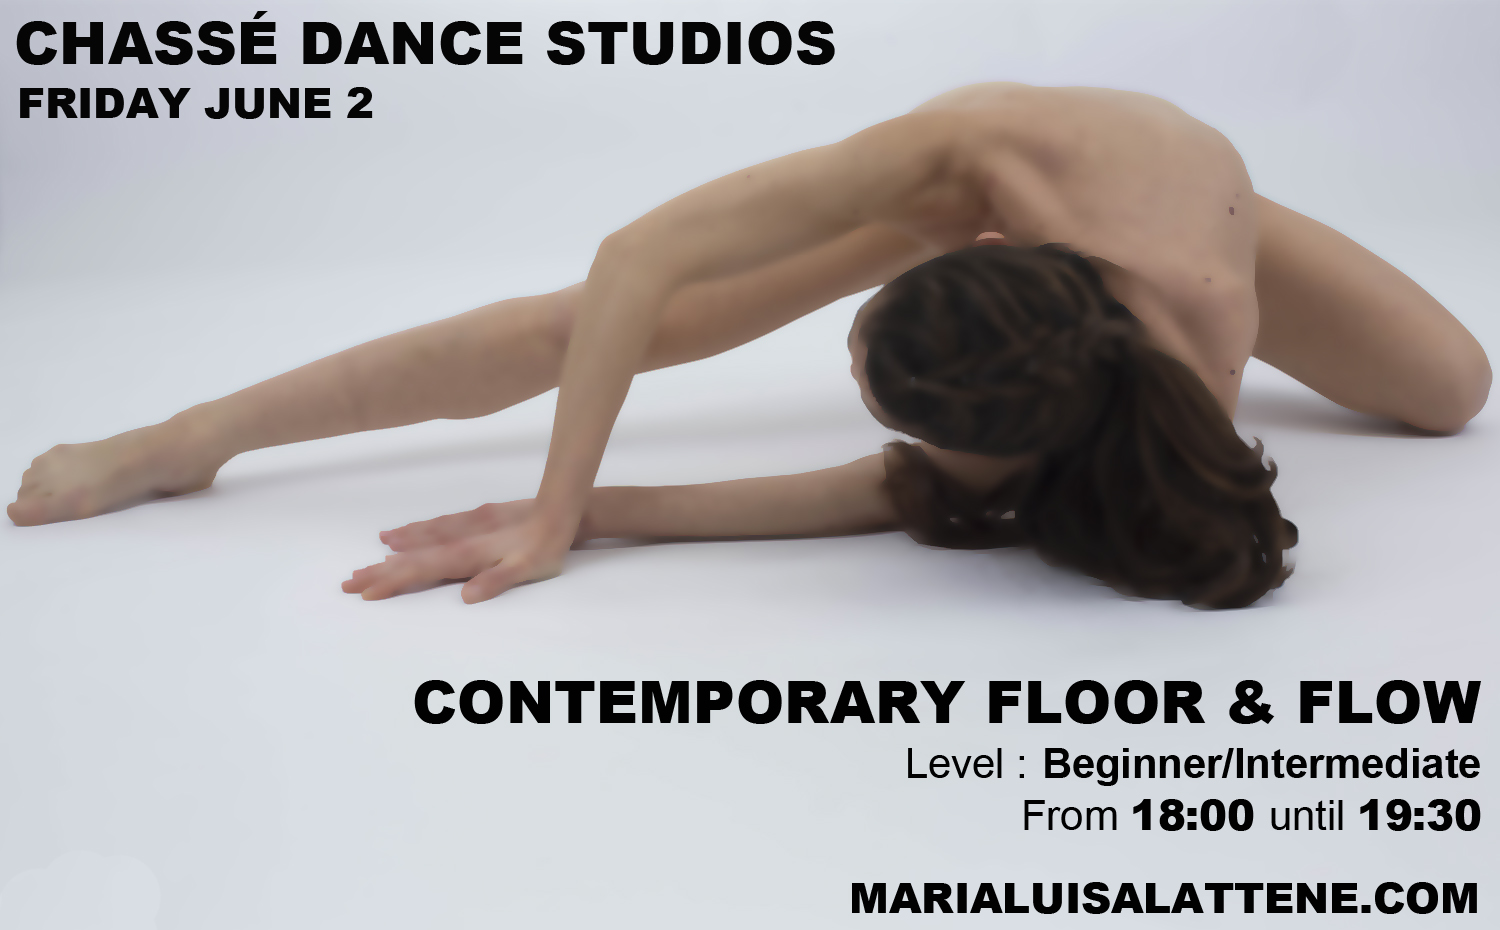 Tonight at Chassé Dance studios come and join me for the floor and flow class, hope to see you all there!